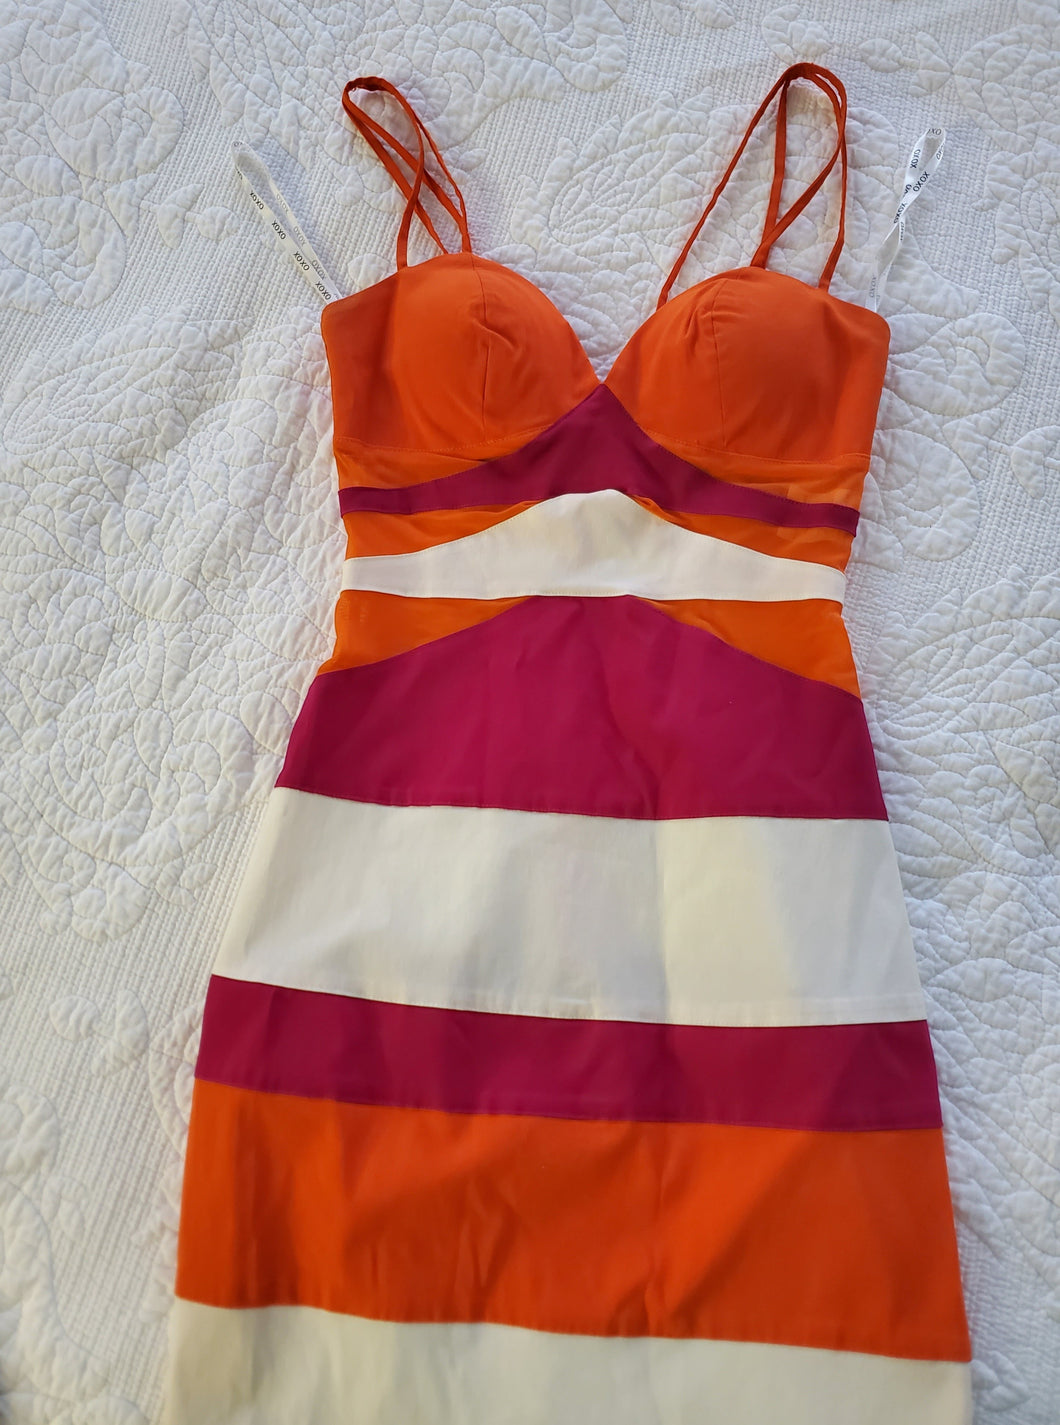 Bodycon Color Blocked Dress by  XOXO Size Small